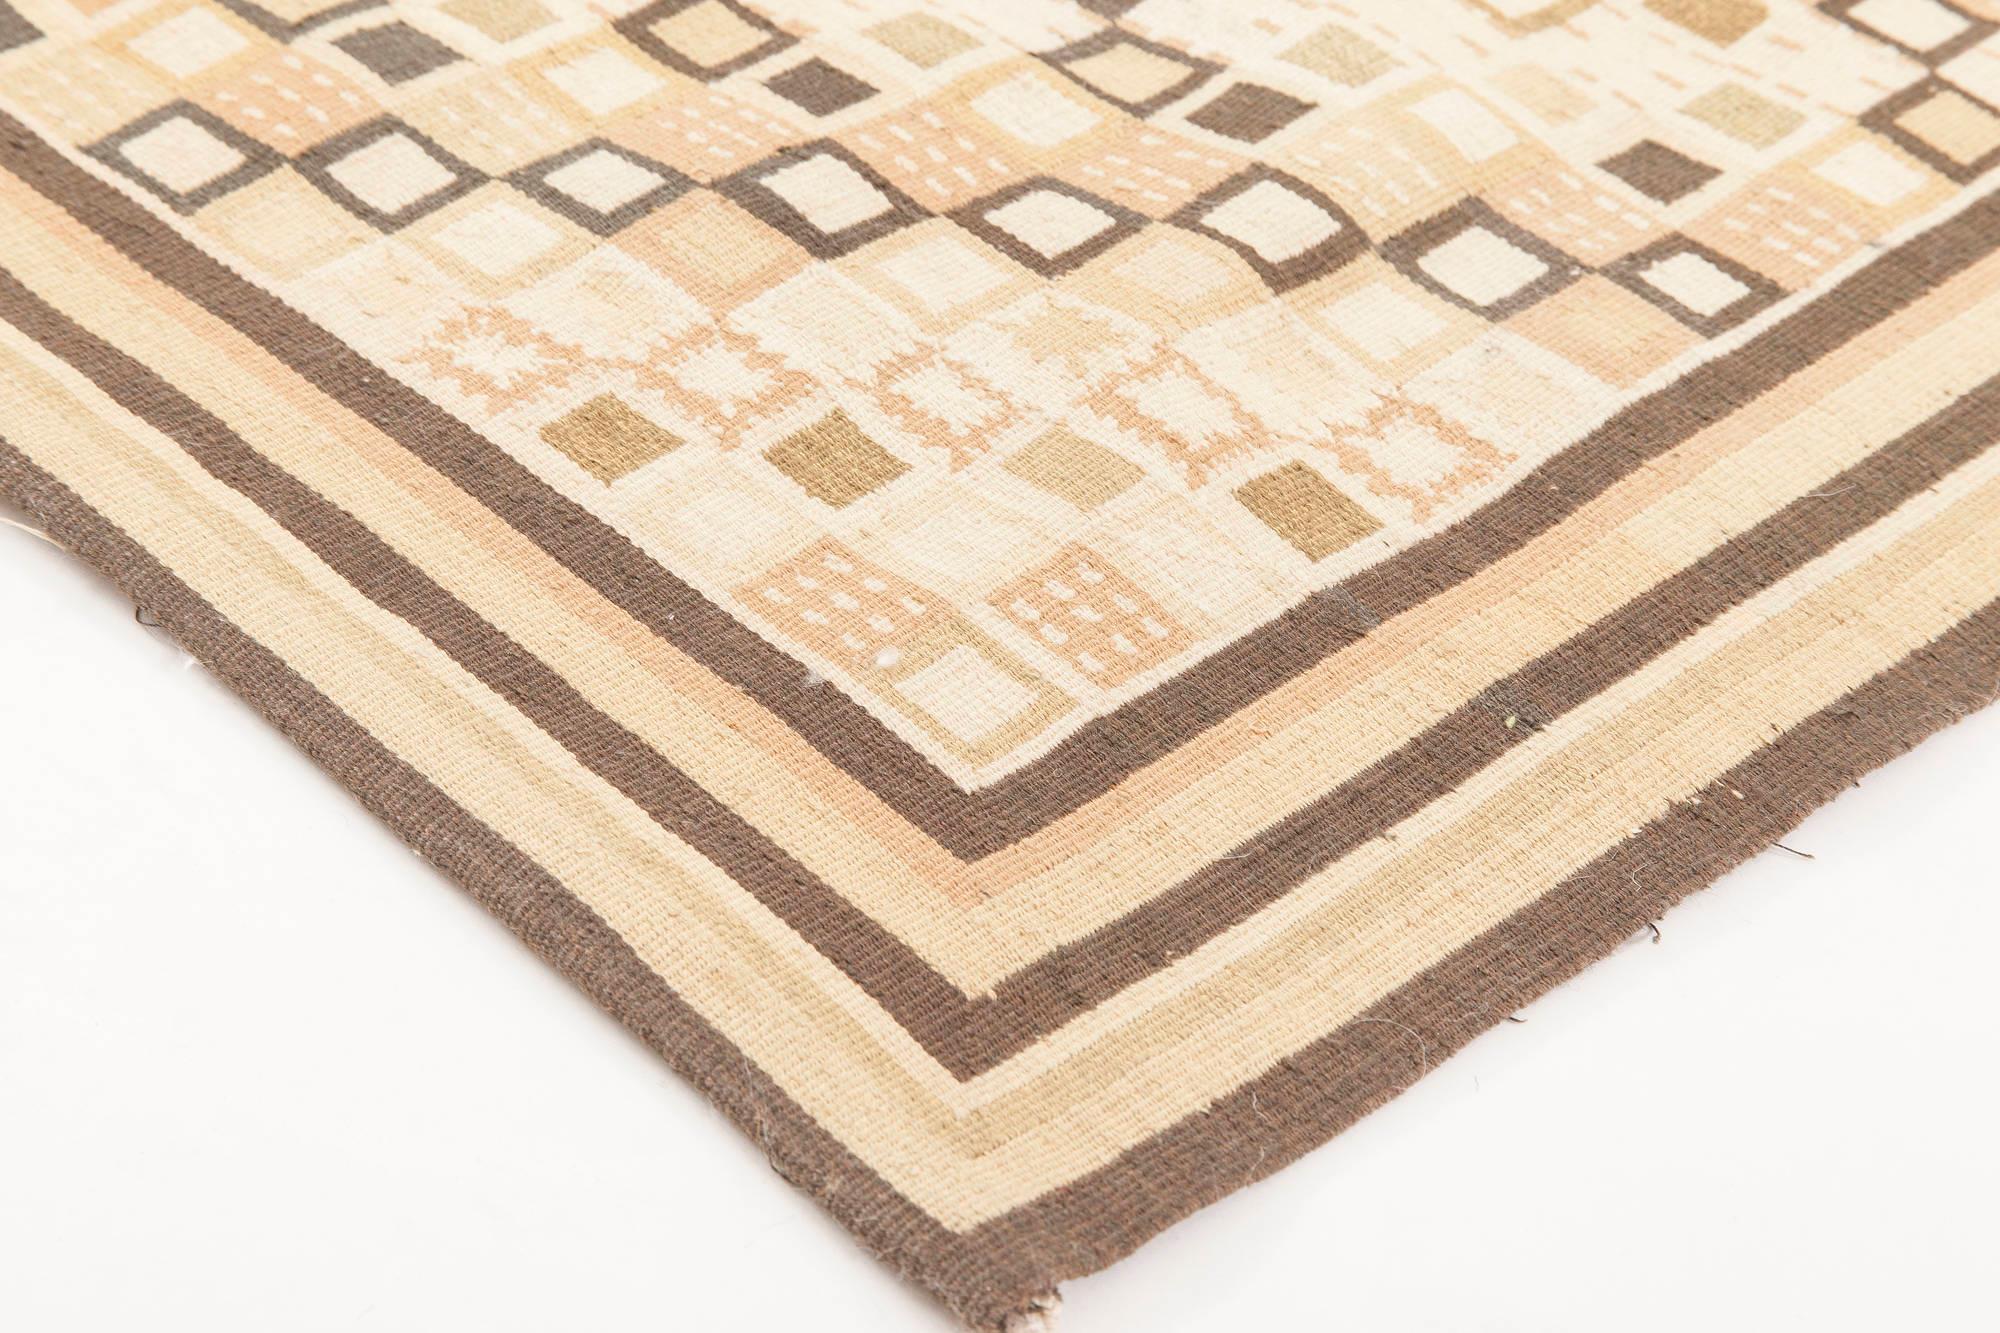 Swedish Design Beige and Brown Flat-Weave Wool Rug by Doris Leslie Blau In New Condition For Sale In New York, NY